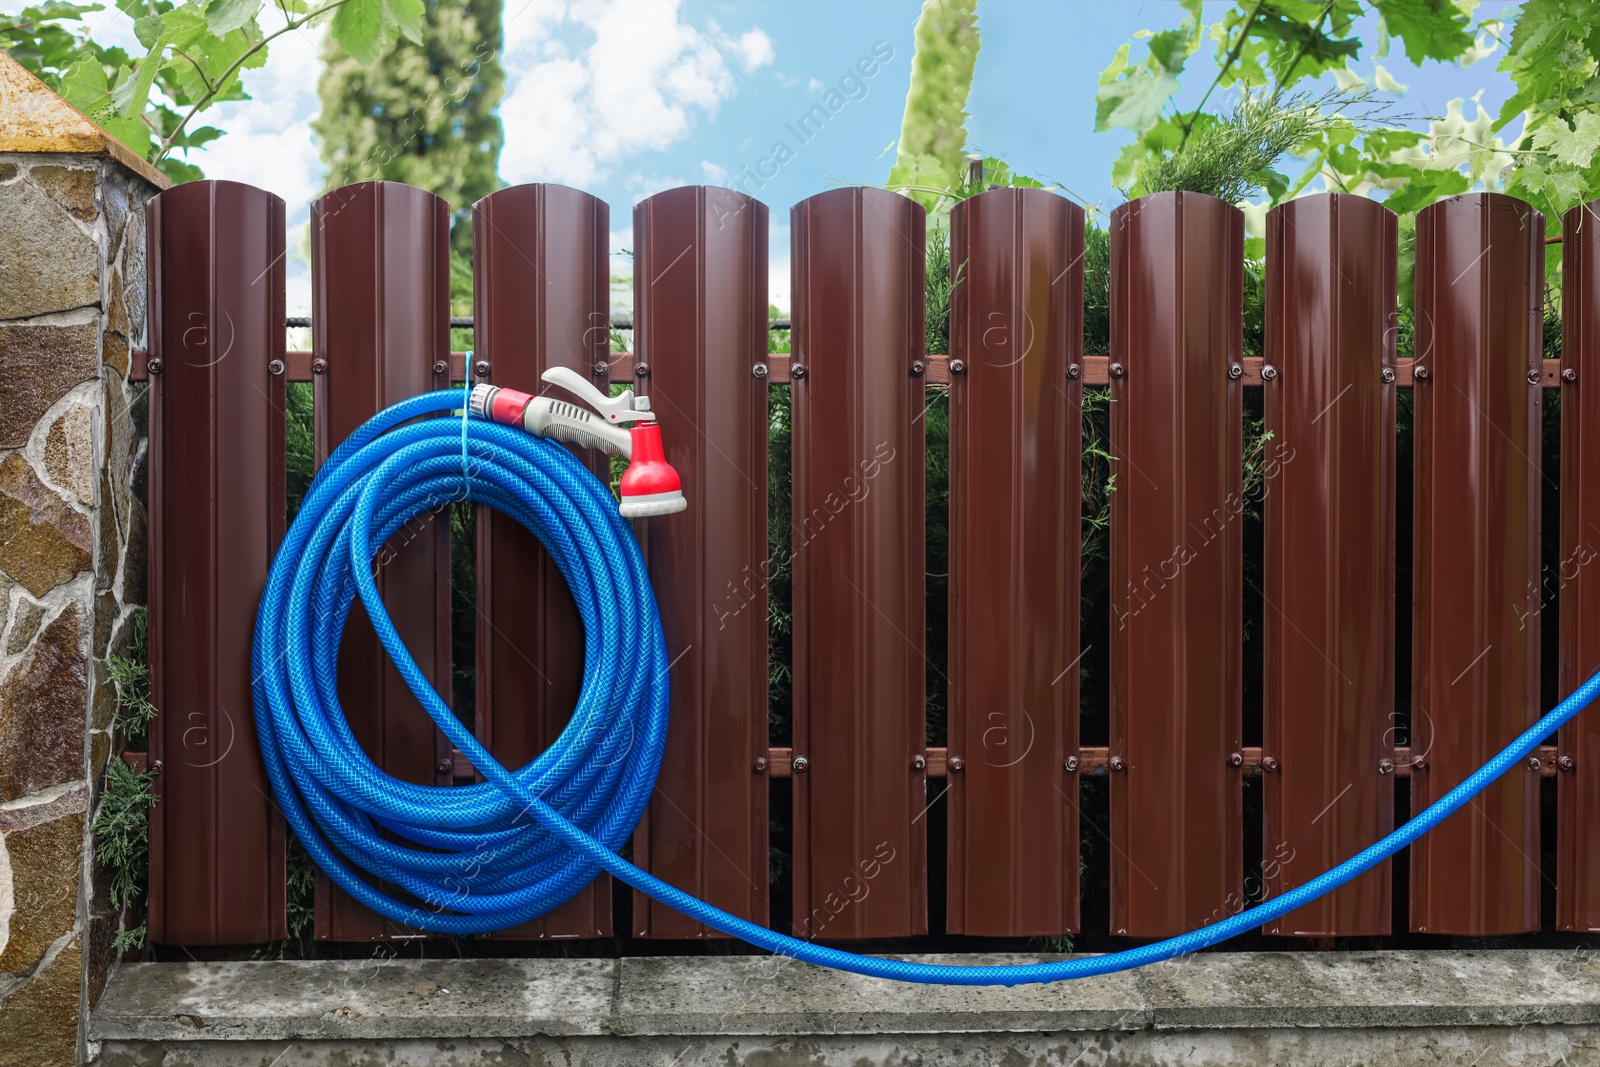 Photo of Watering hose with sprinkler hanging on wooden fence in garden